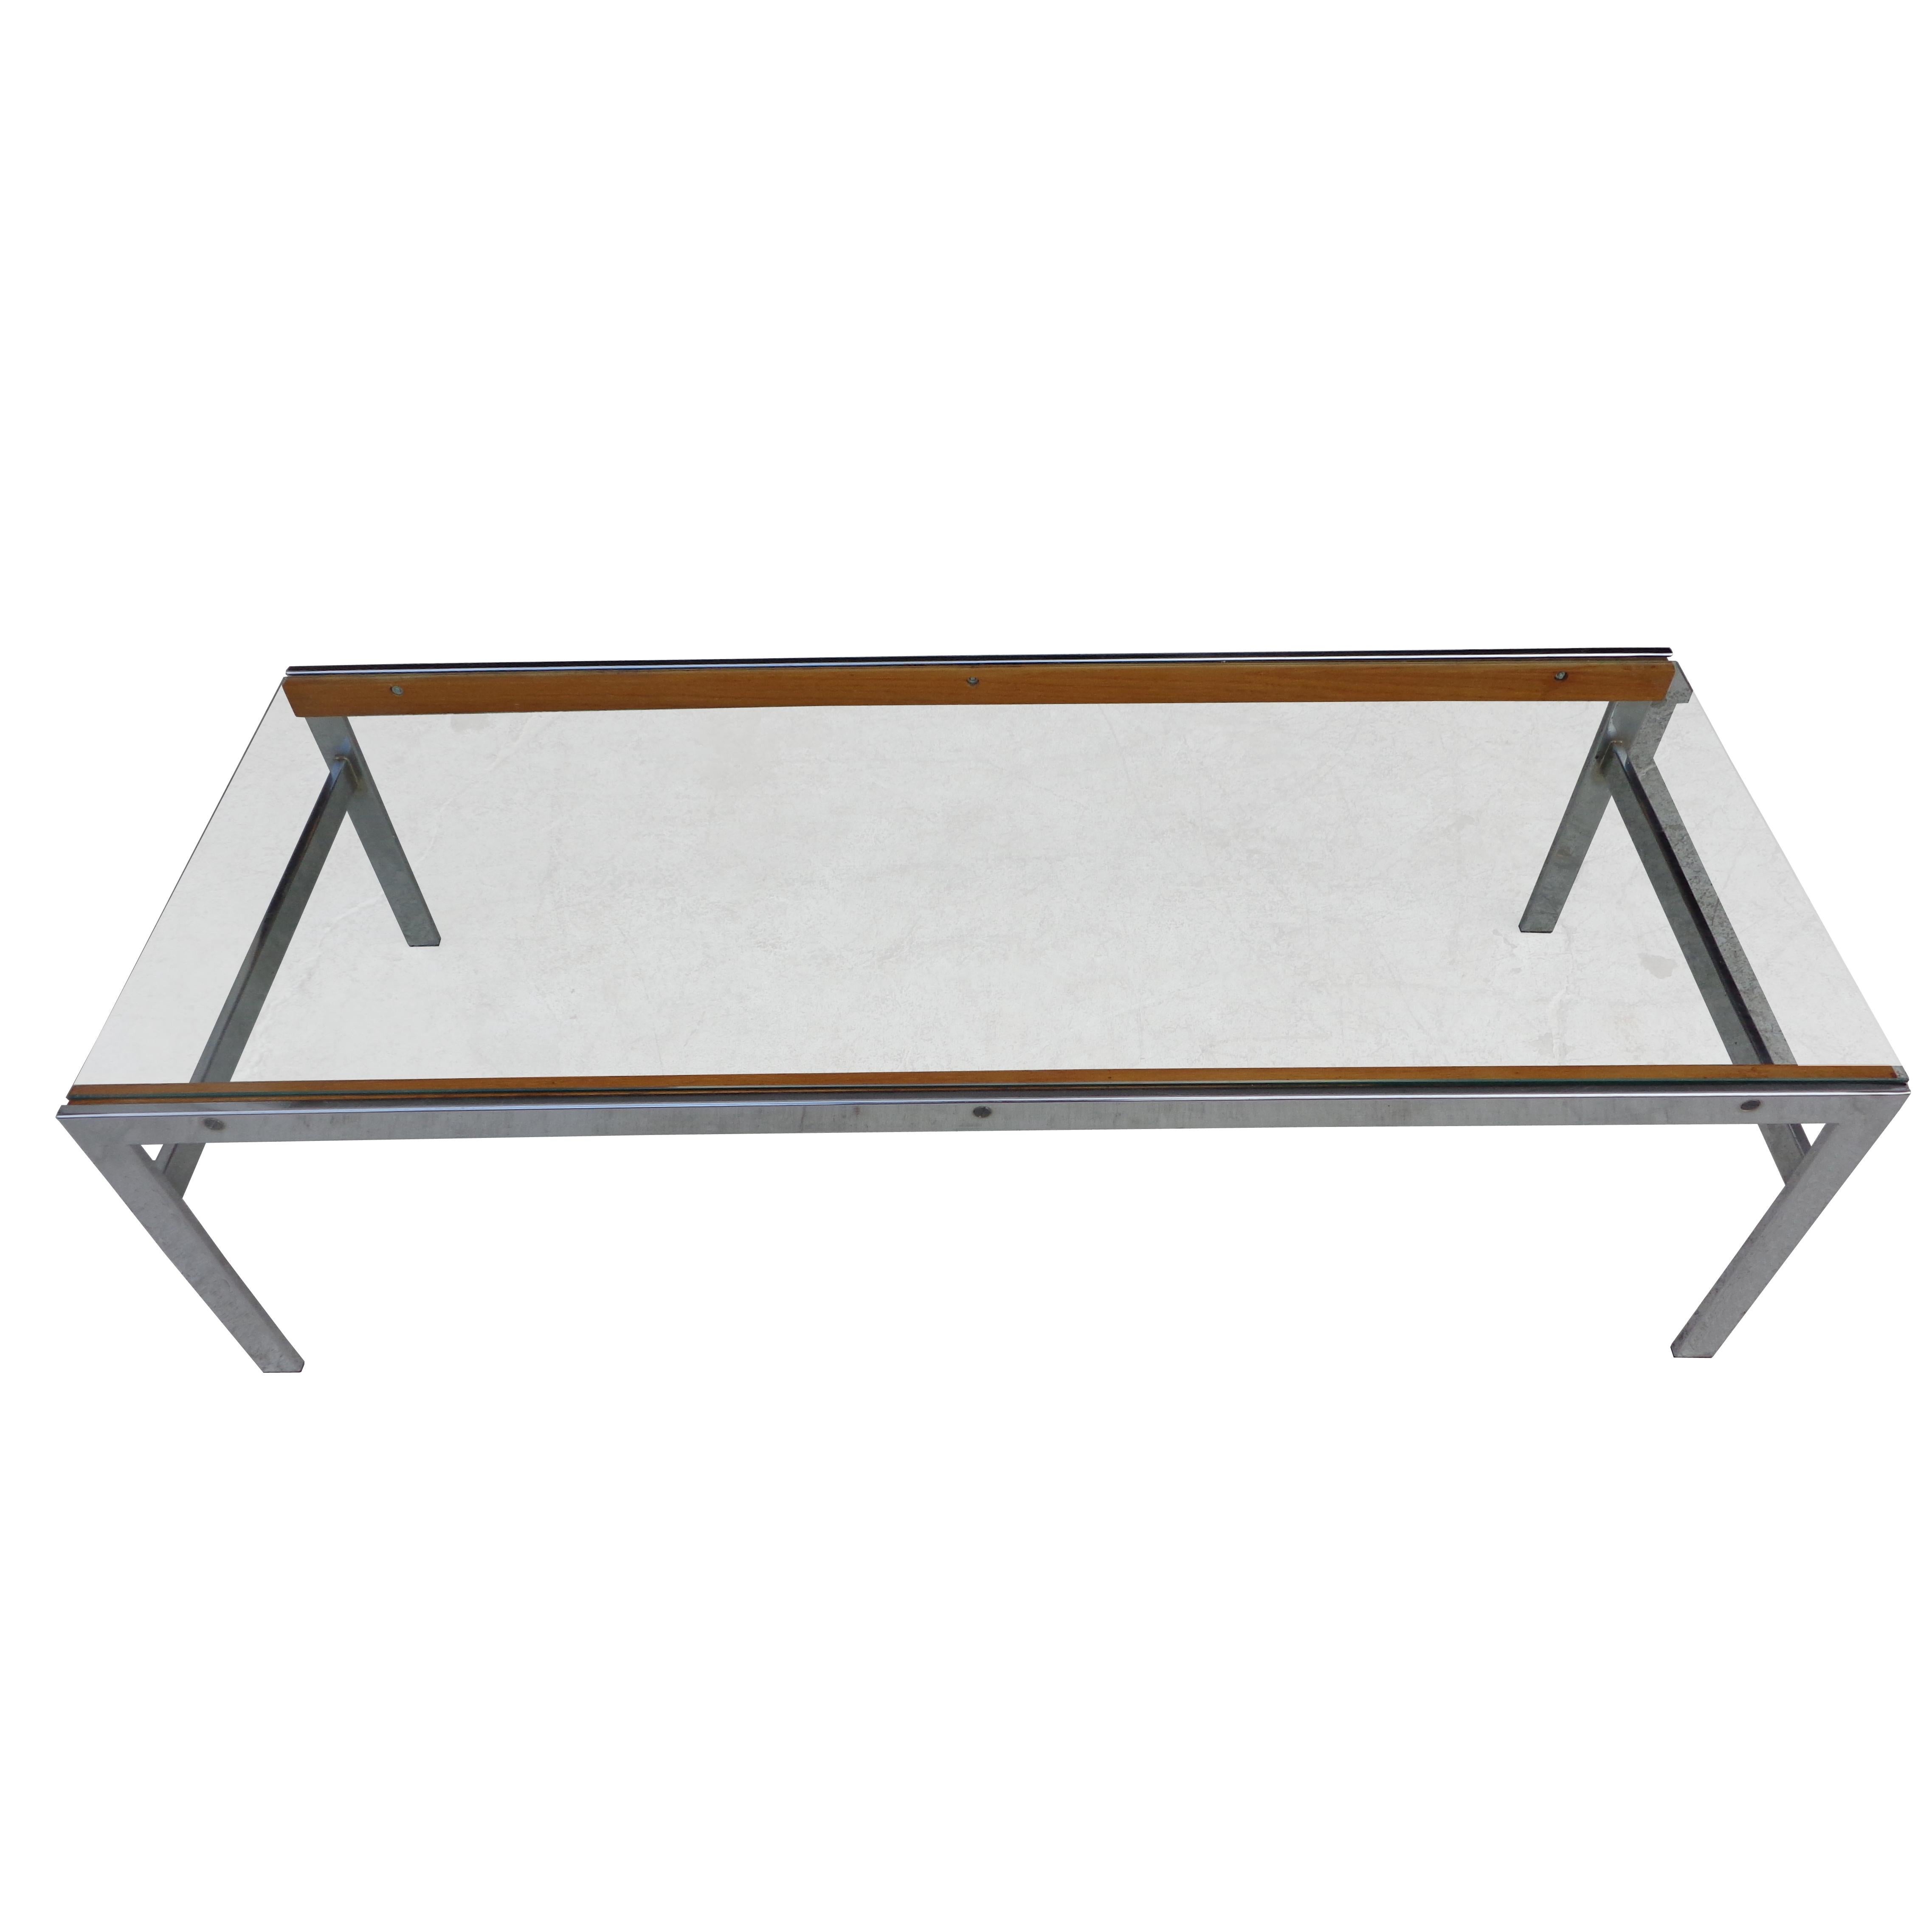 Mid century glass chrome wood coffee table

Interesting mix of glass, chrome and wood in this 54